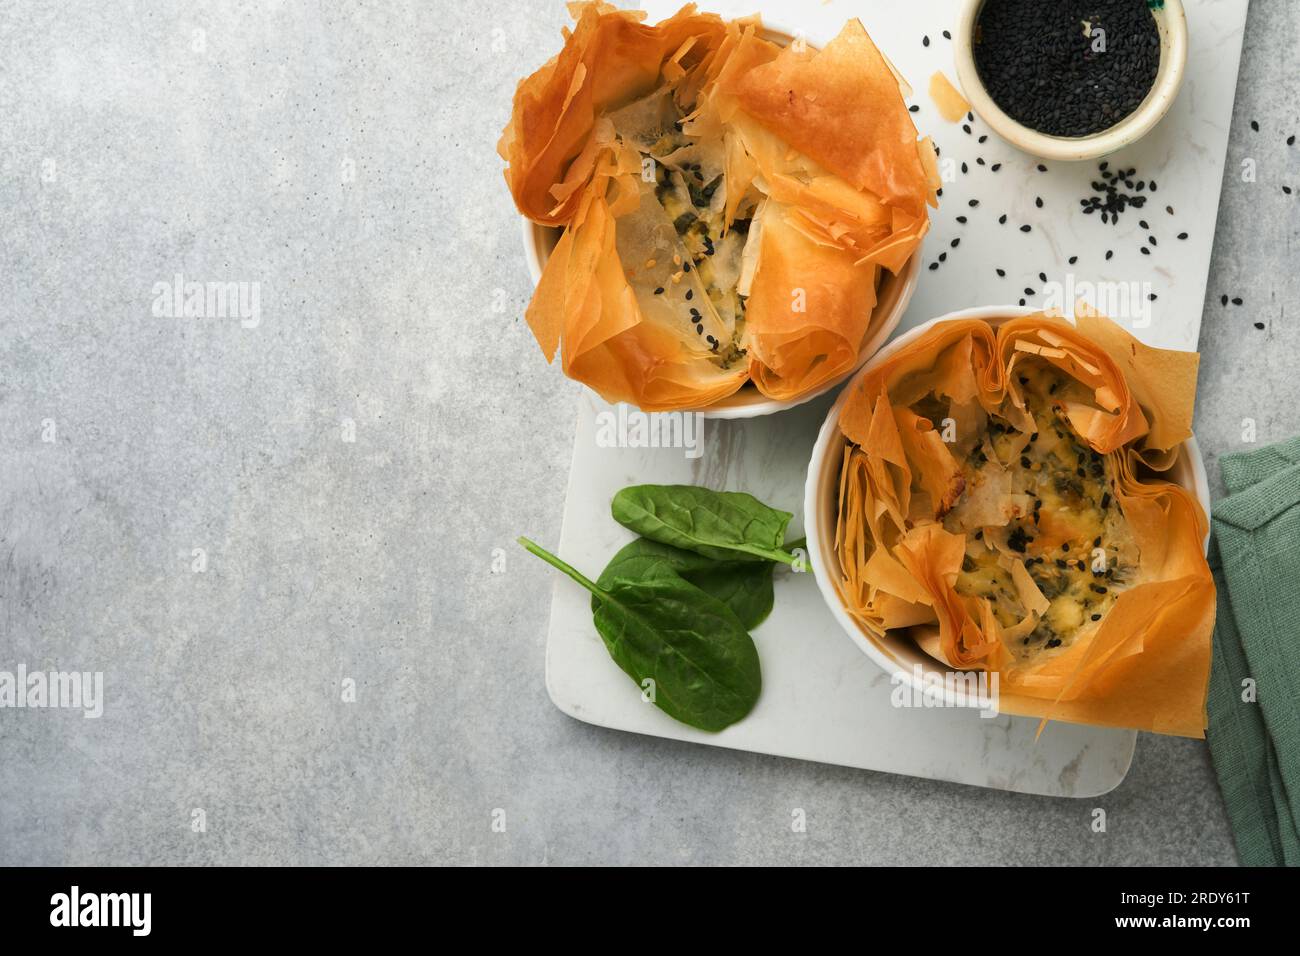 Filo pies with soft feta cheese and spinach in ceramic molds on old grey table background. Filo portions pies. Small Baked Spanakopita pies. Top view. Stock Photo